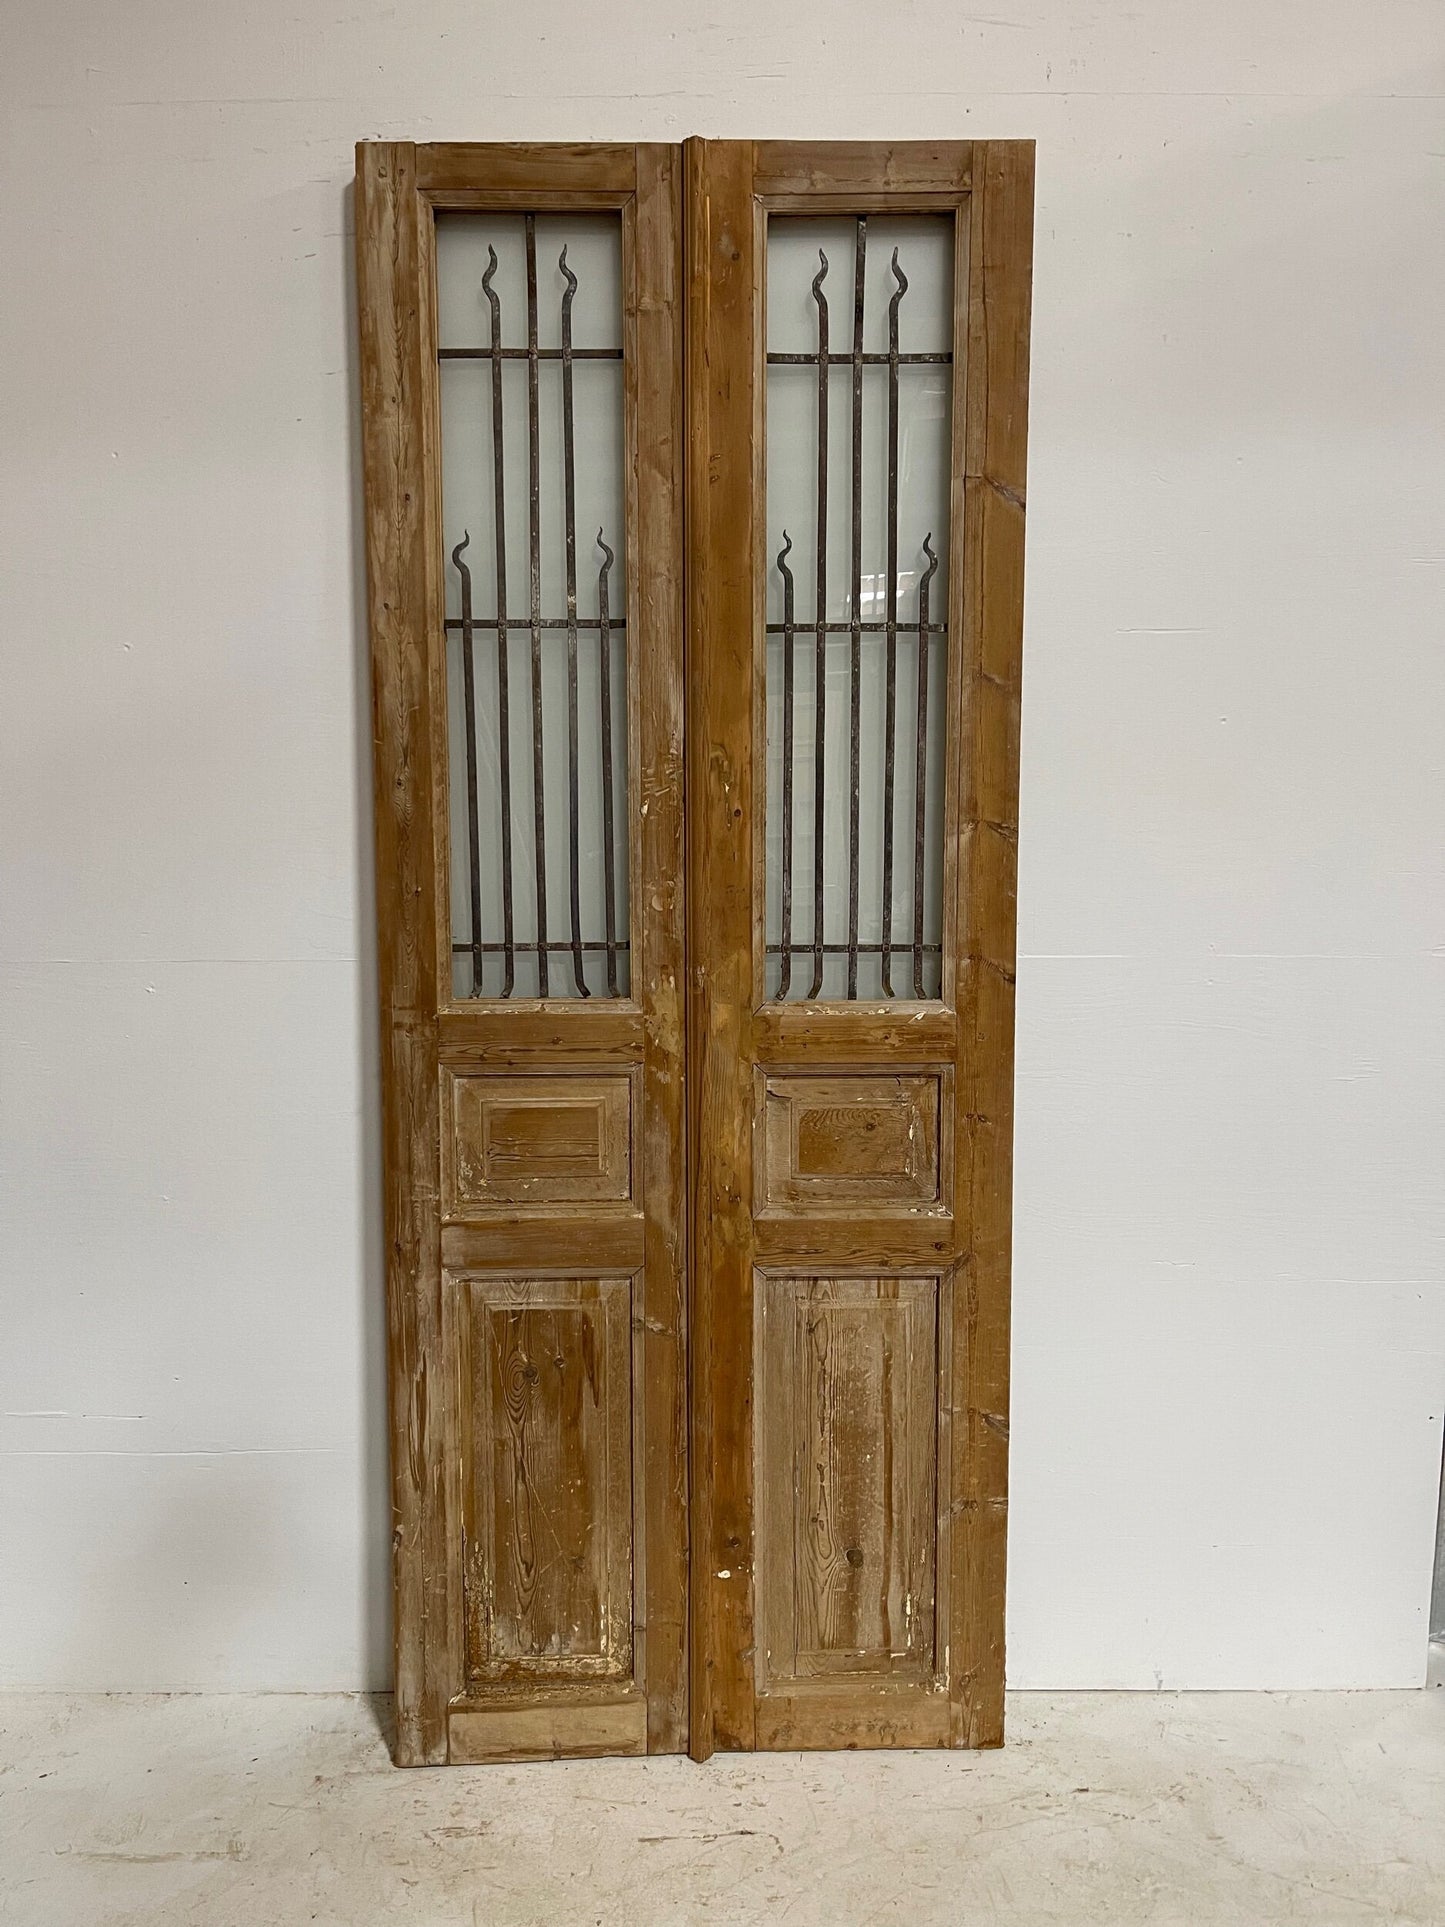 Antique French door (92.5x36.75) with iron G1034s